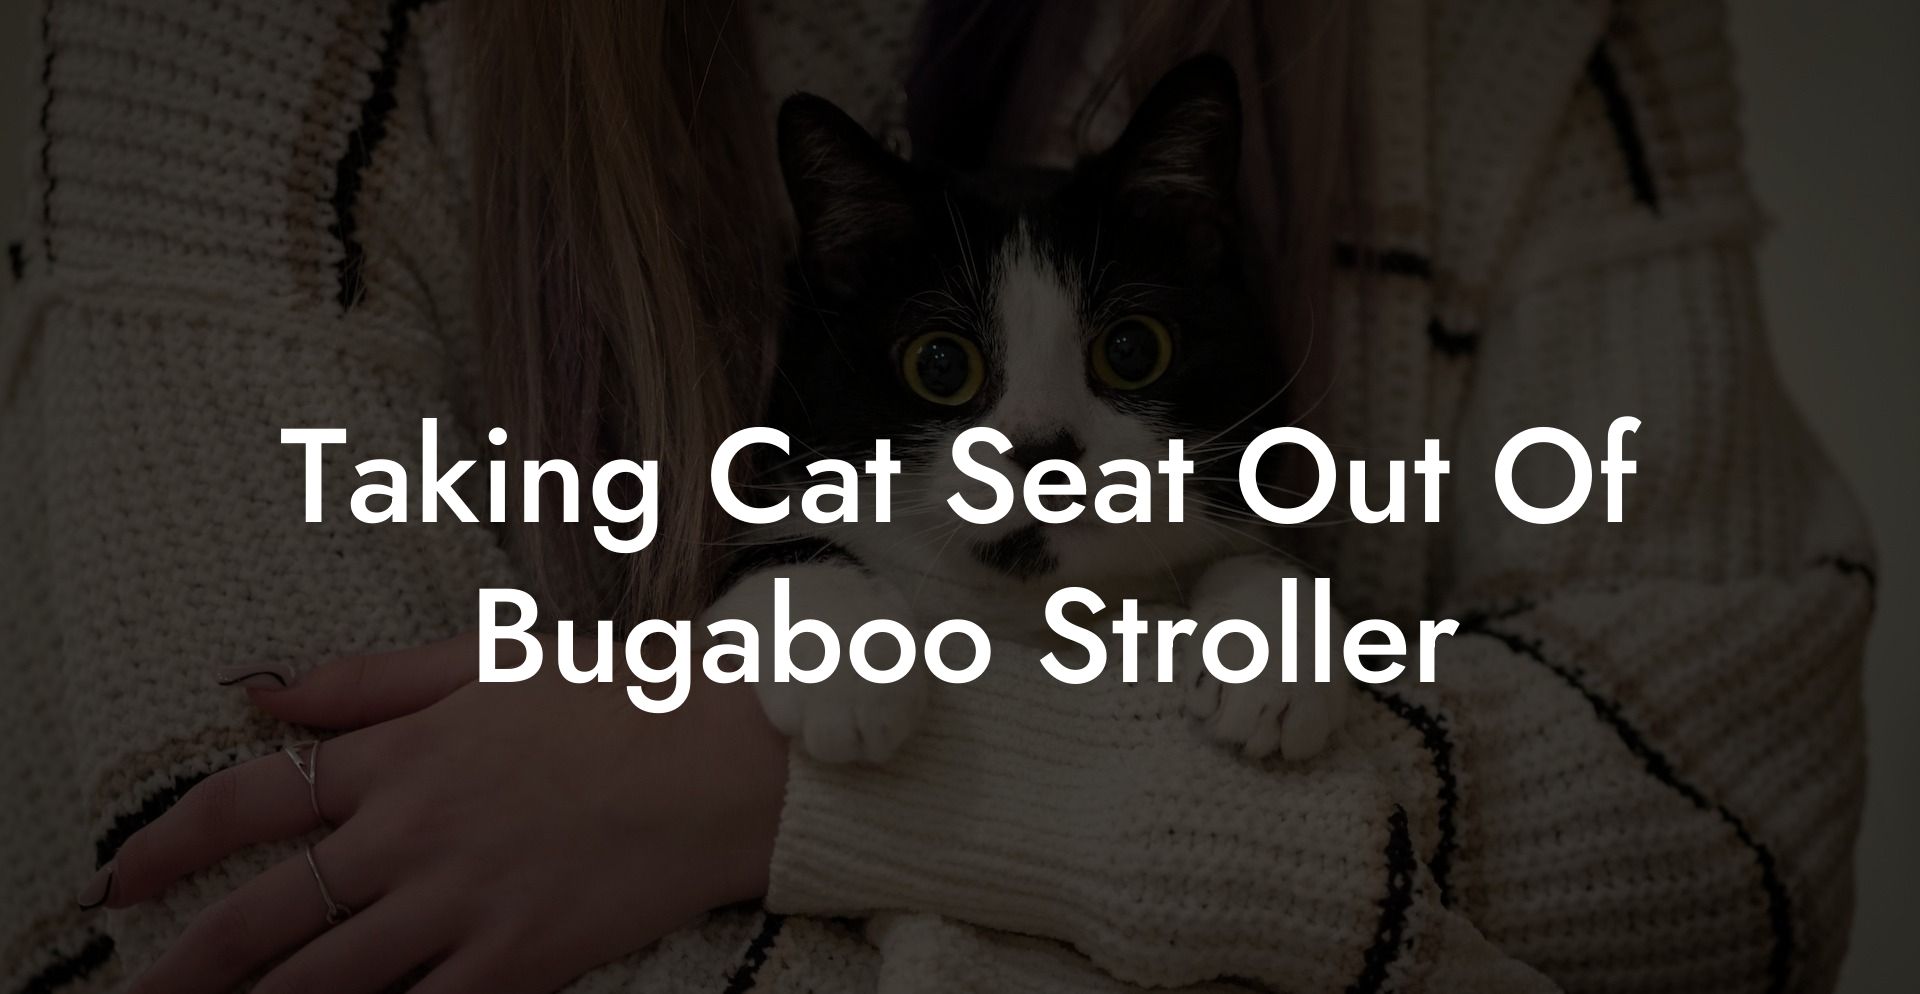 Taking Cat Seat Out Of Bugaboo Stroller